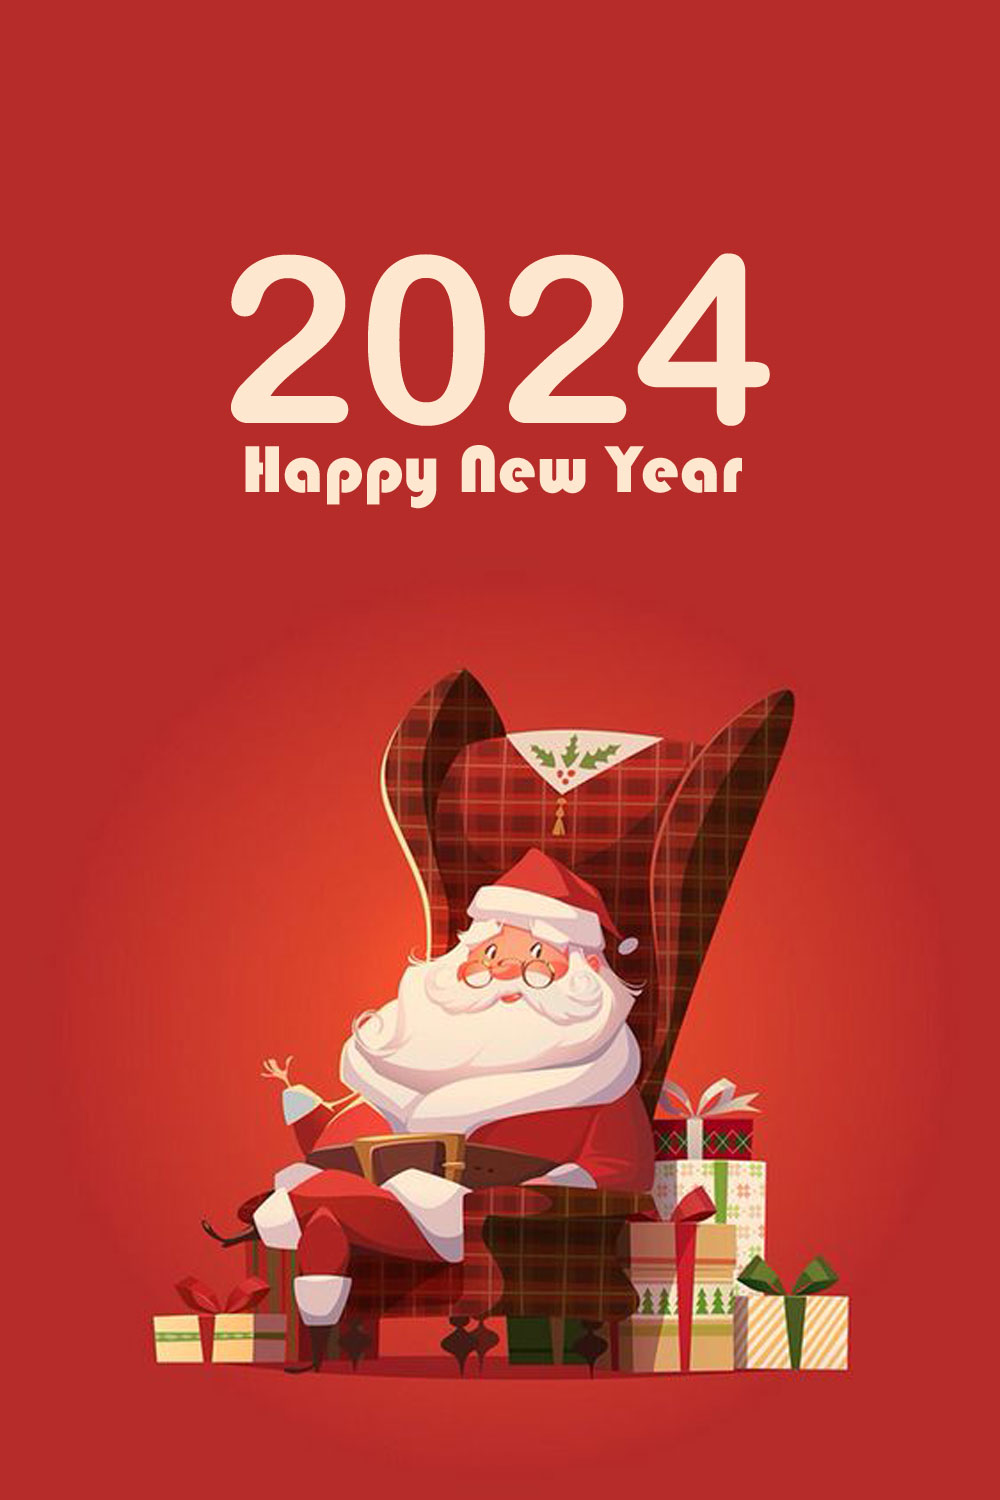 Happy New Year 2024 Red Papa Noel Wallpaper Birthday Wishes, Memes, SMS & Greeting eCard Image